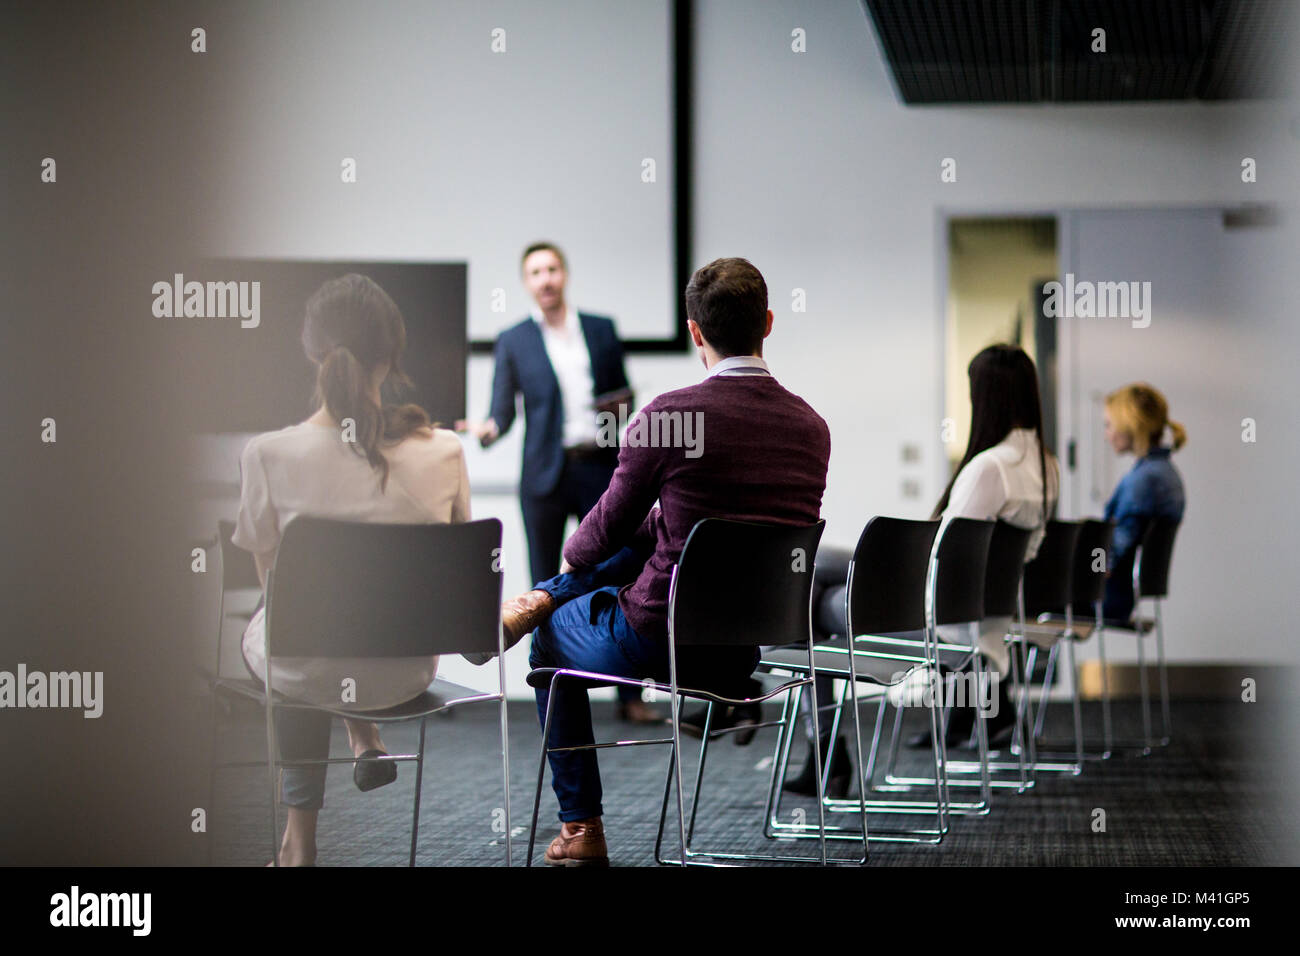 Business training conference Foto Stock